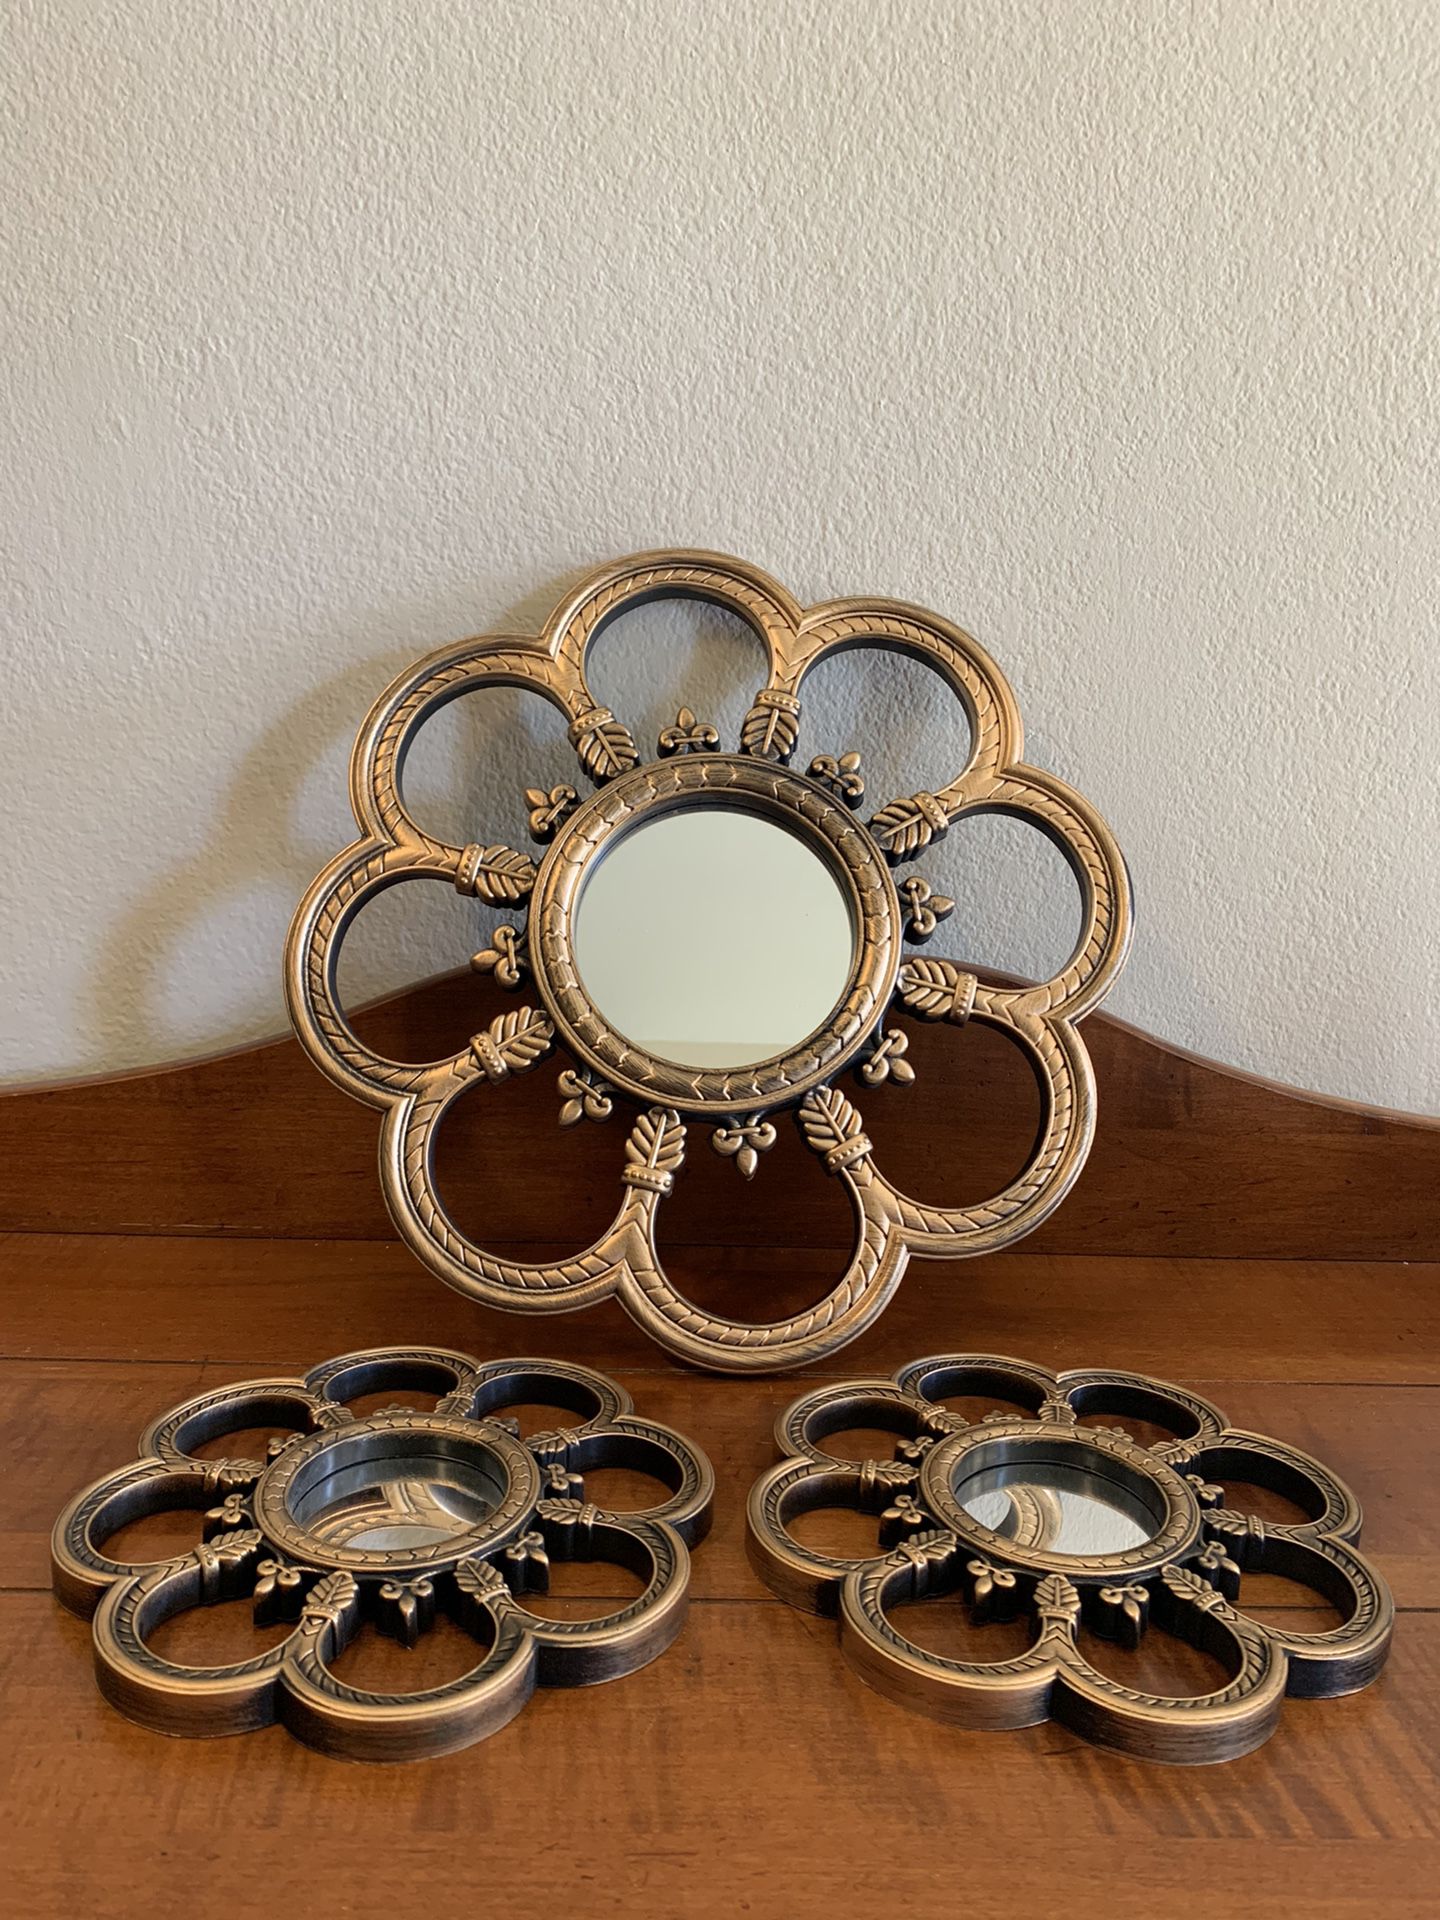 Set of 3 flower mirrors - plastic material smaller are just under 8” diameter, larger one is 14”